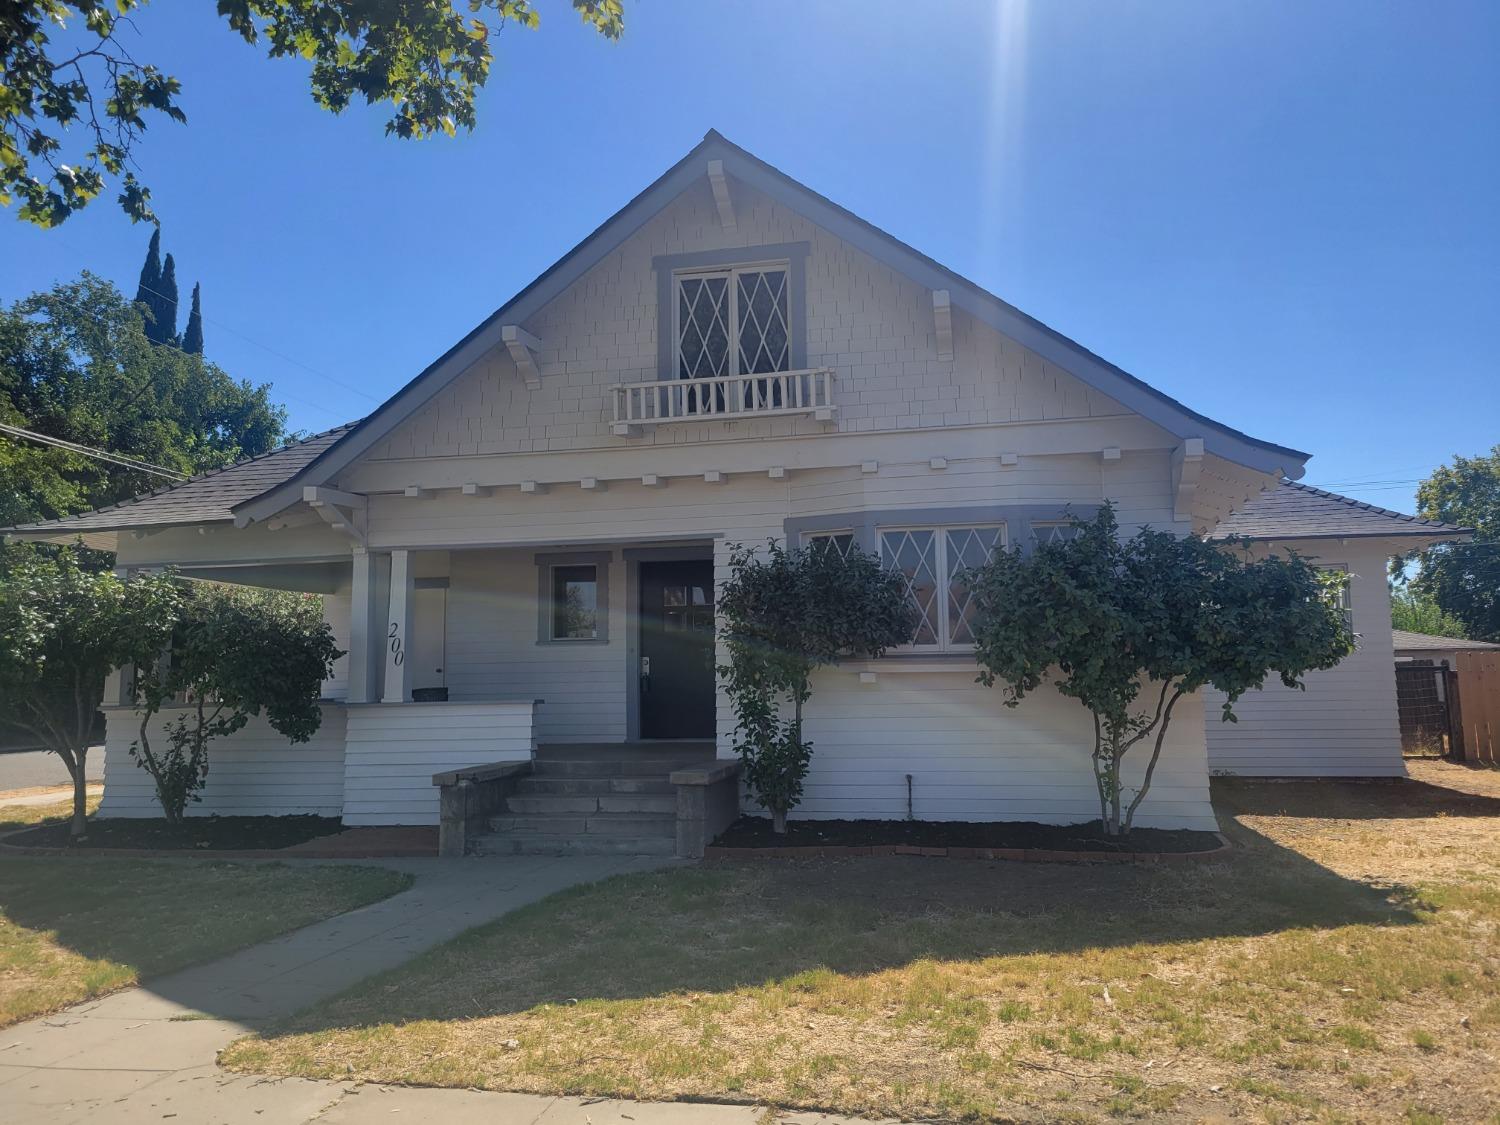 Photo of 200 N L St in Madera, CA